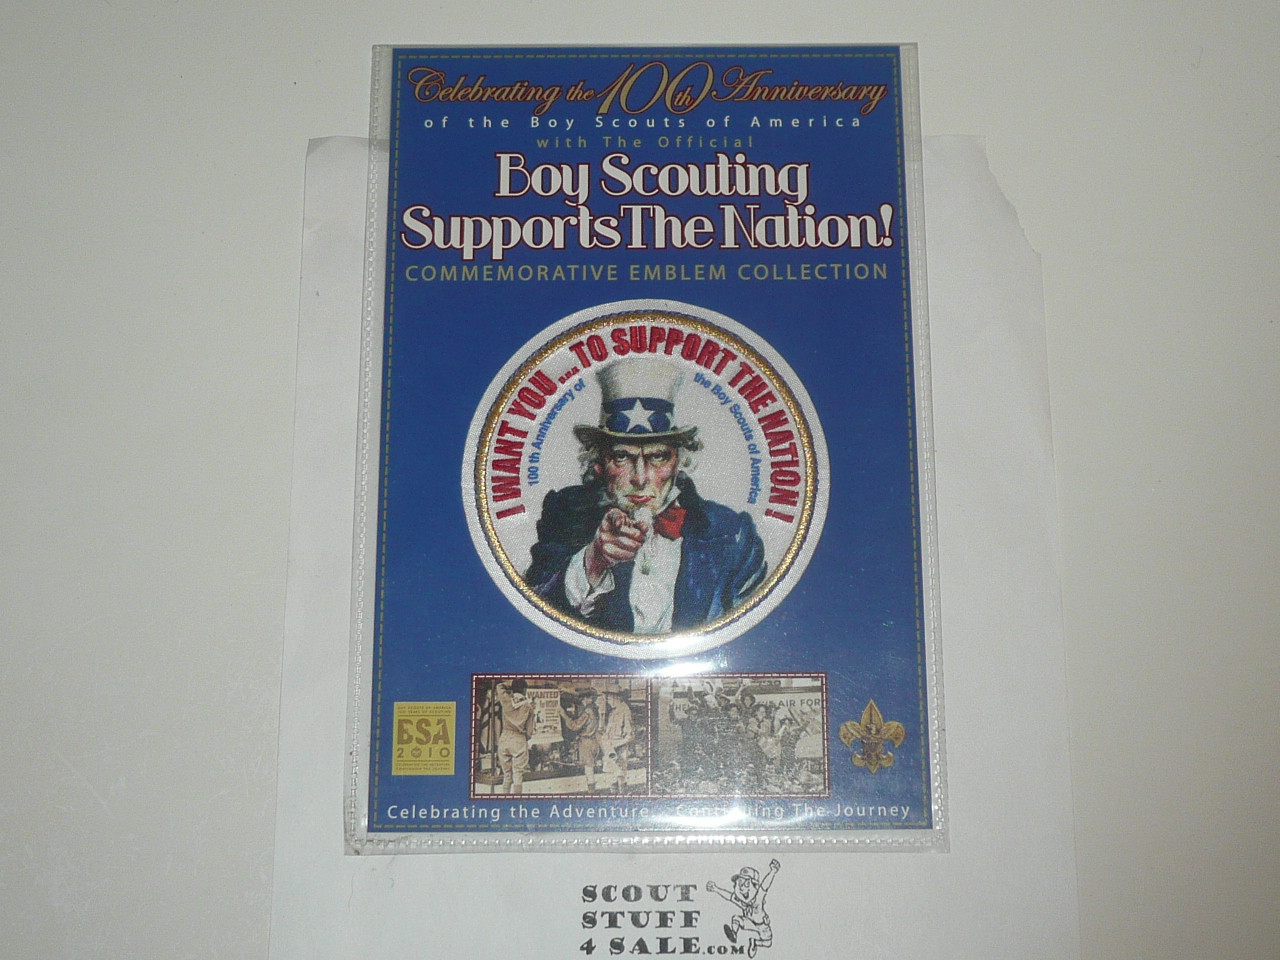 2010 100th Boy Scout Anniversary Commemorative Patch, Boy Scouting Supports the Nation Series, I Want You to Support America